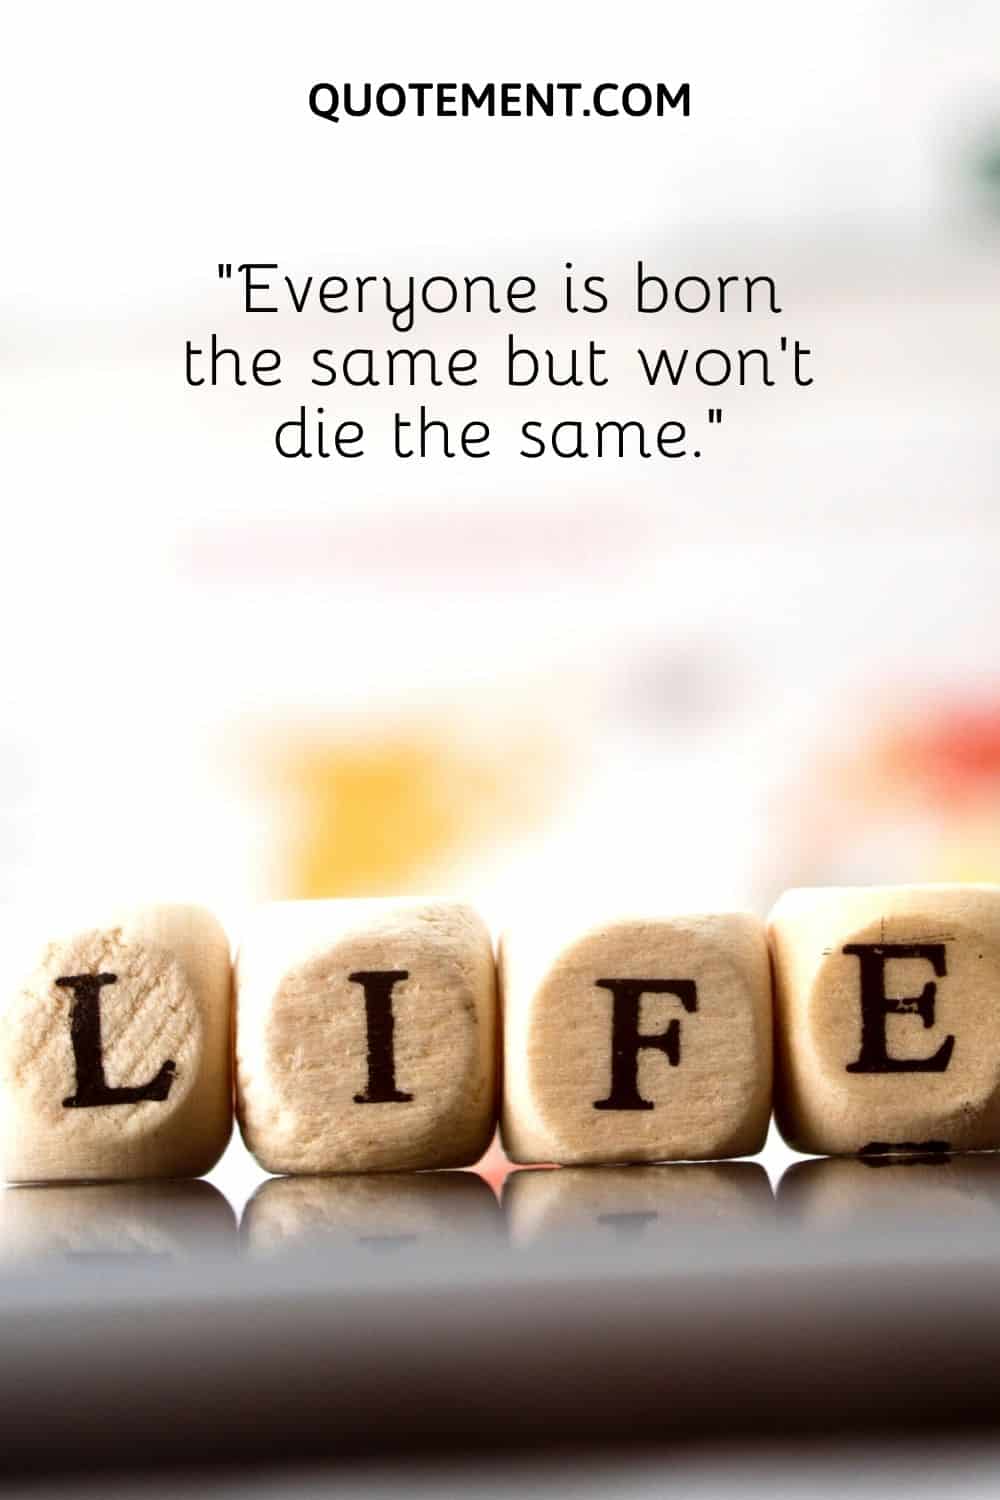 Everyone is born the same but won’t die the same